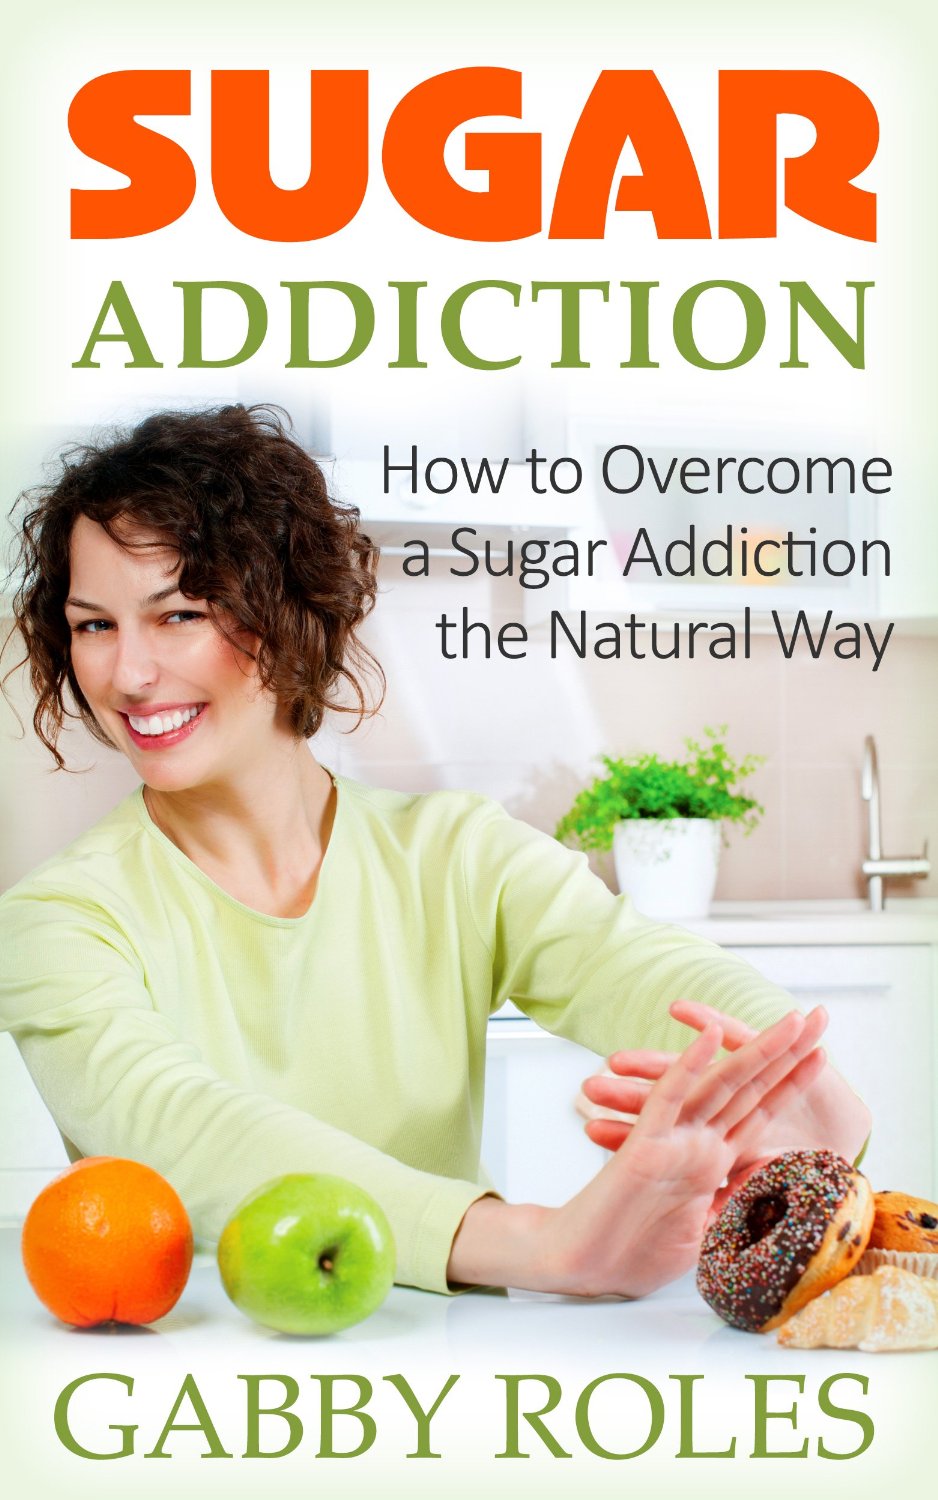 Sugar Addiction: How to Overcome a Sugar Addiction the Natural Way by Gabby Roles